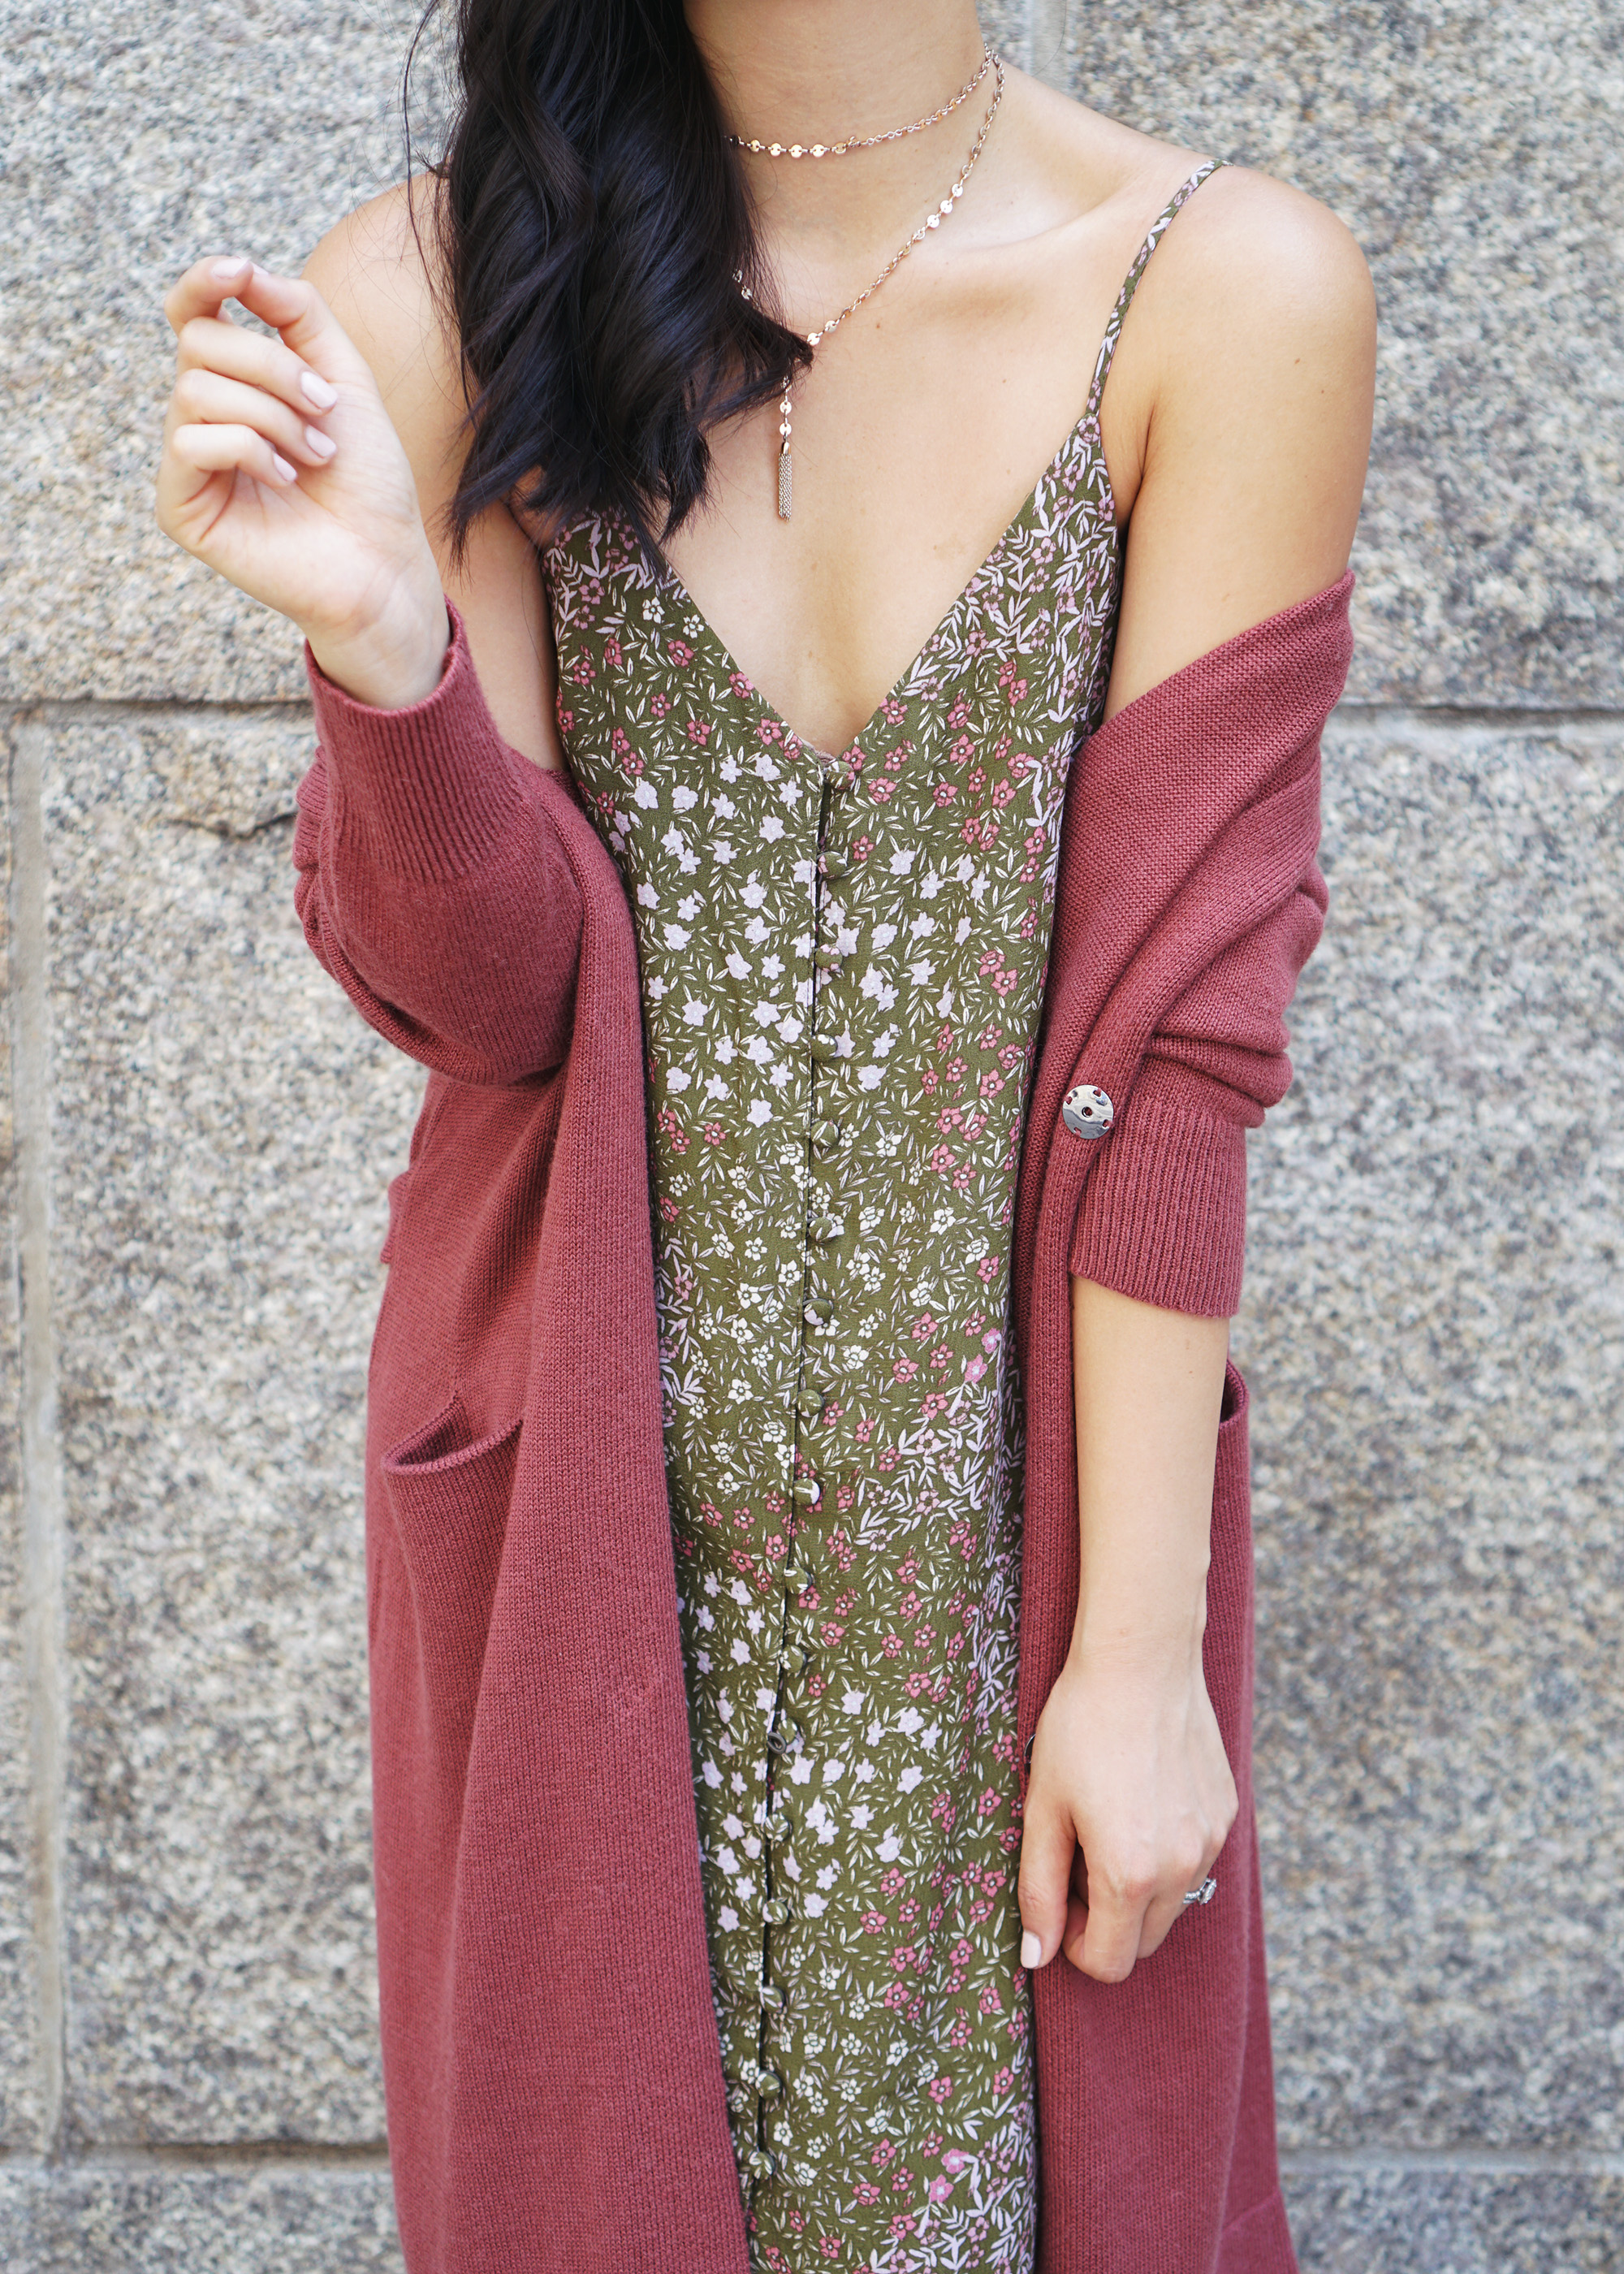 Fall Outfit: Soft Cozy Cardigan & Floral Slip Dress